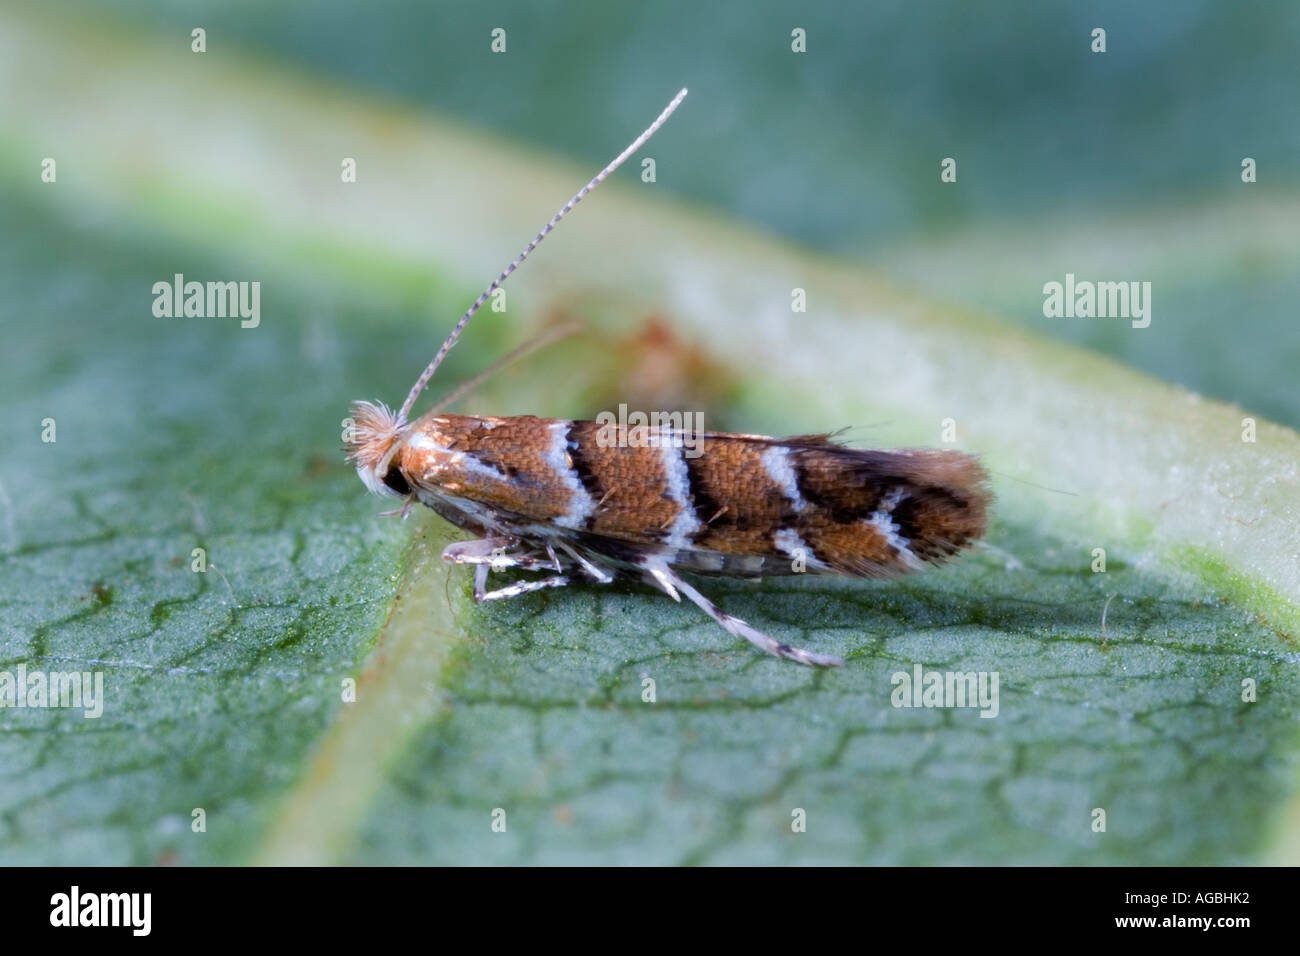 Cameraria ohridella at rest on Horse Chestnut leaf showing markings and detail Willington Bedfordshire Stock Photo